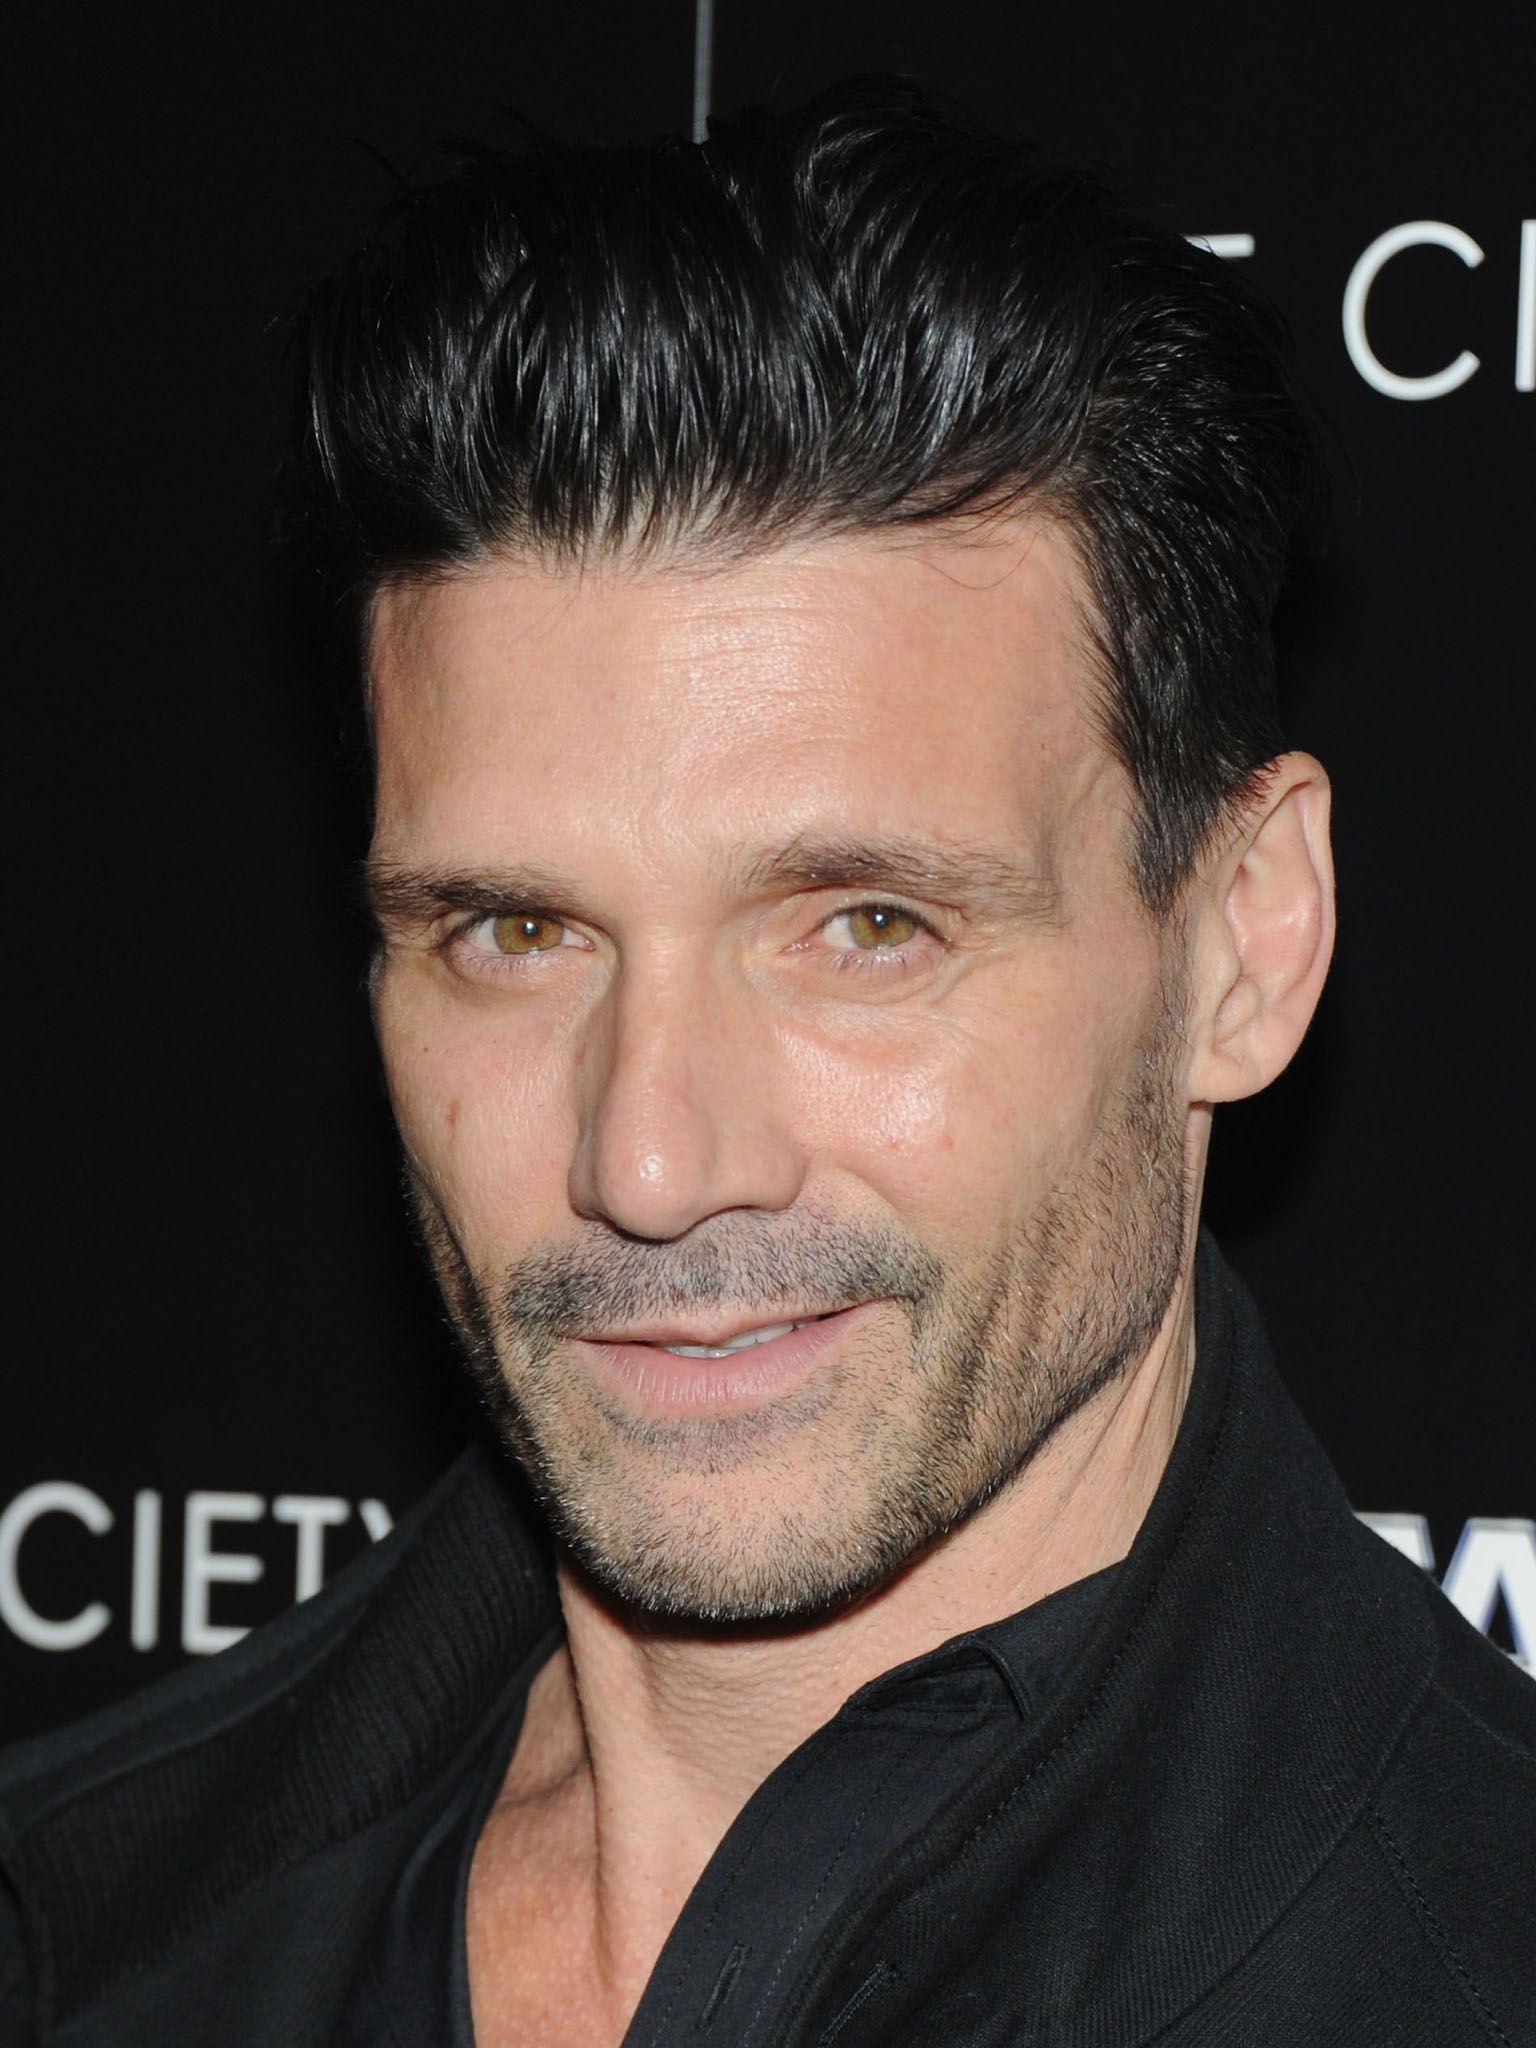 Frank Grillo Wallpapers High Quality Download Free